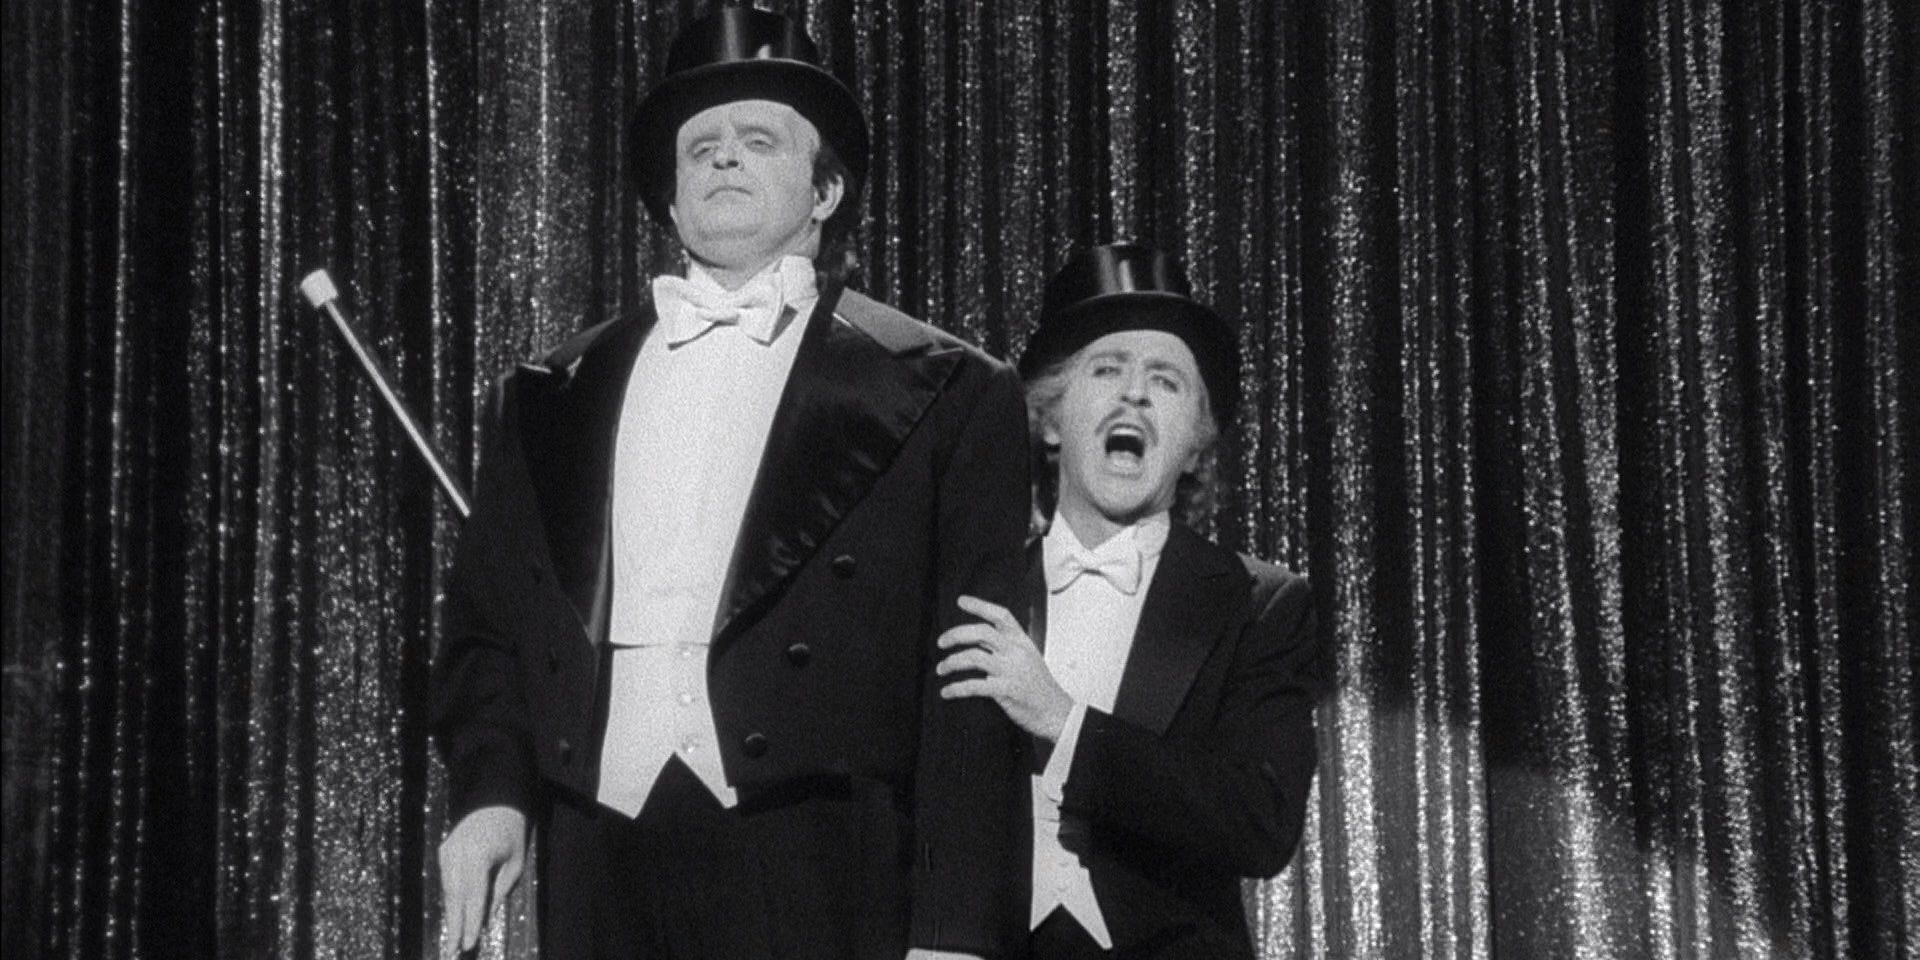 Gene Wilder as Dr. Frankenstein and Peter Boyle as the monster singing "Puttin' on the Ritz" in Young Frankenstein